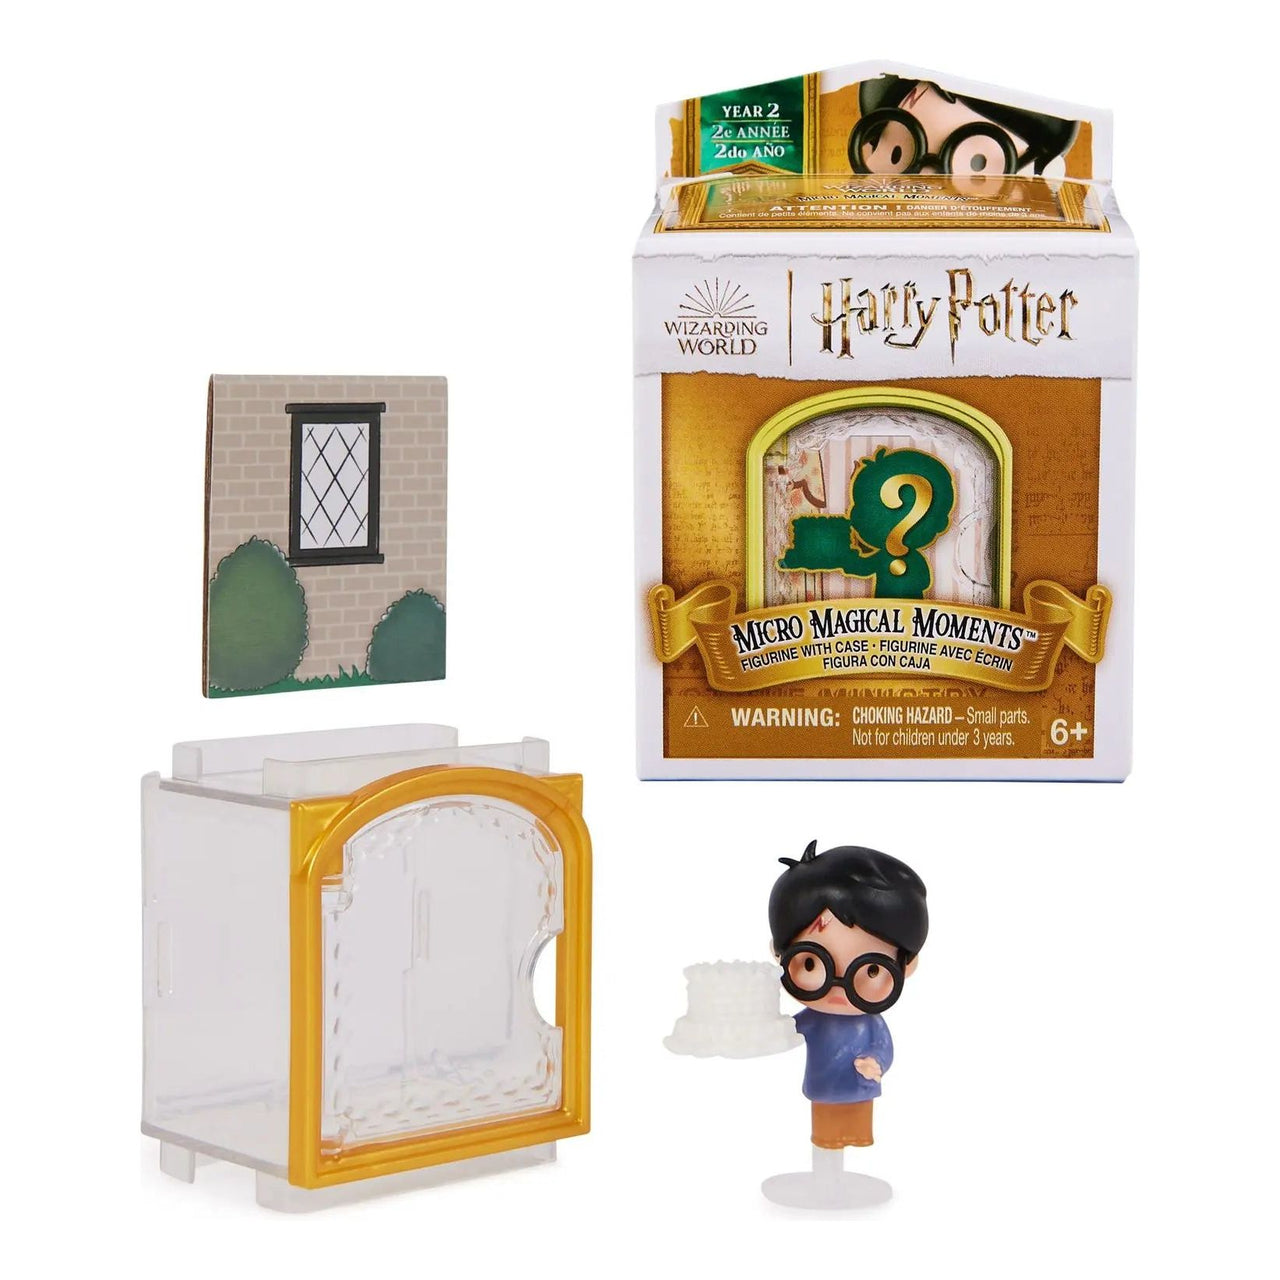 Wizarding World Harry Potter Micro Magical Moments Collectible Single Pack Assortment Harry Potter